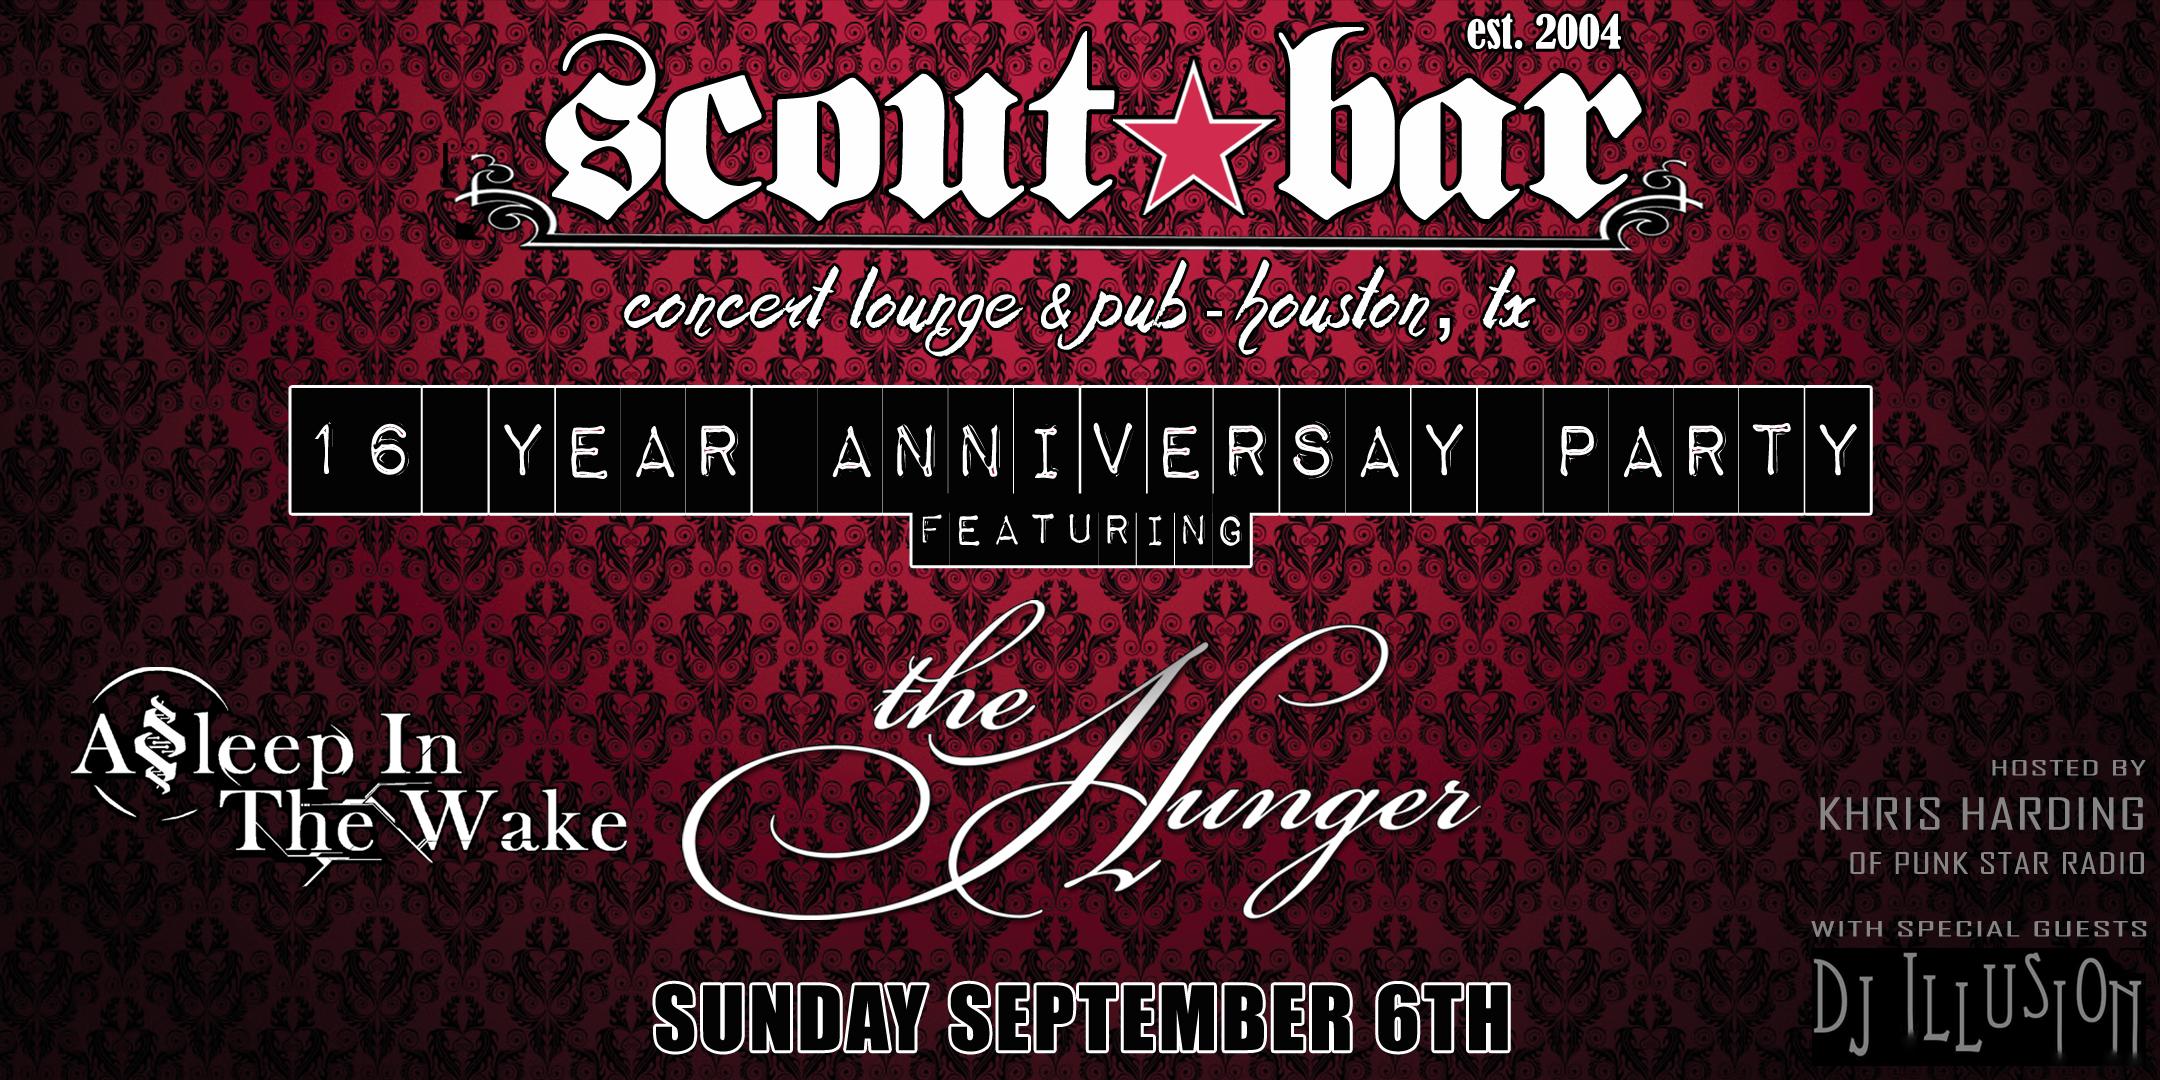 Scout Bar 16 Year Anniversary party featuring The Hunger and more